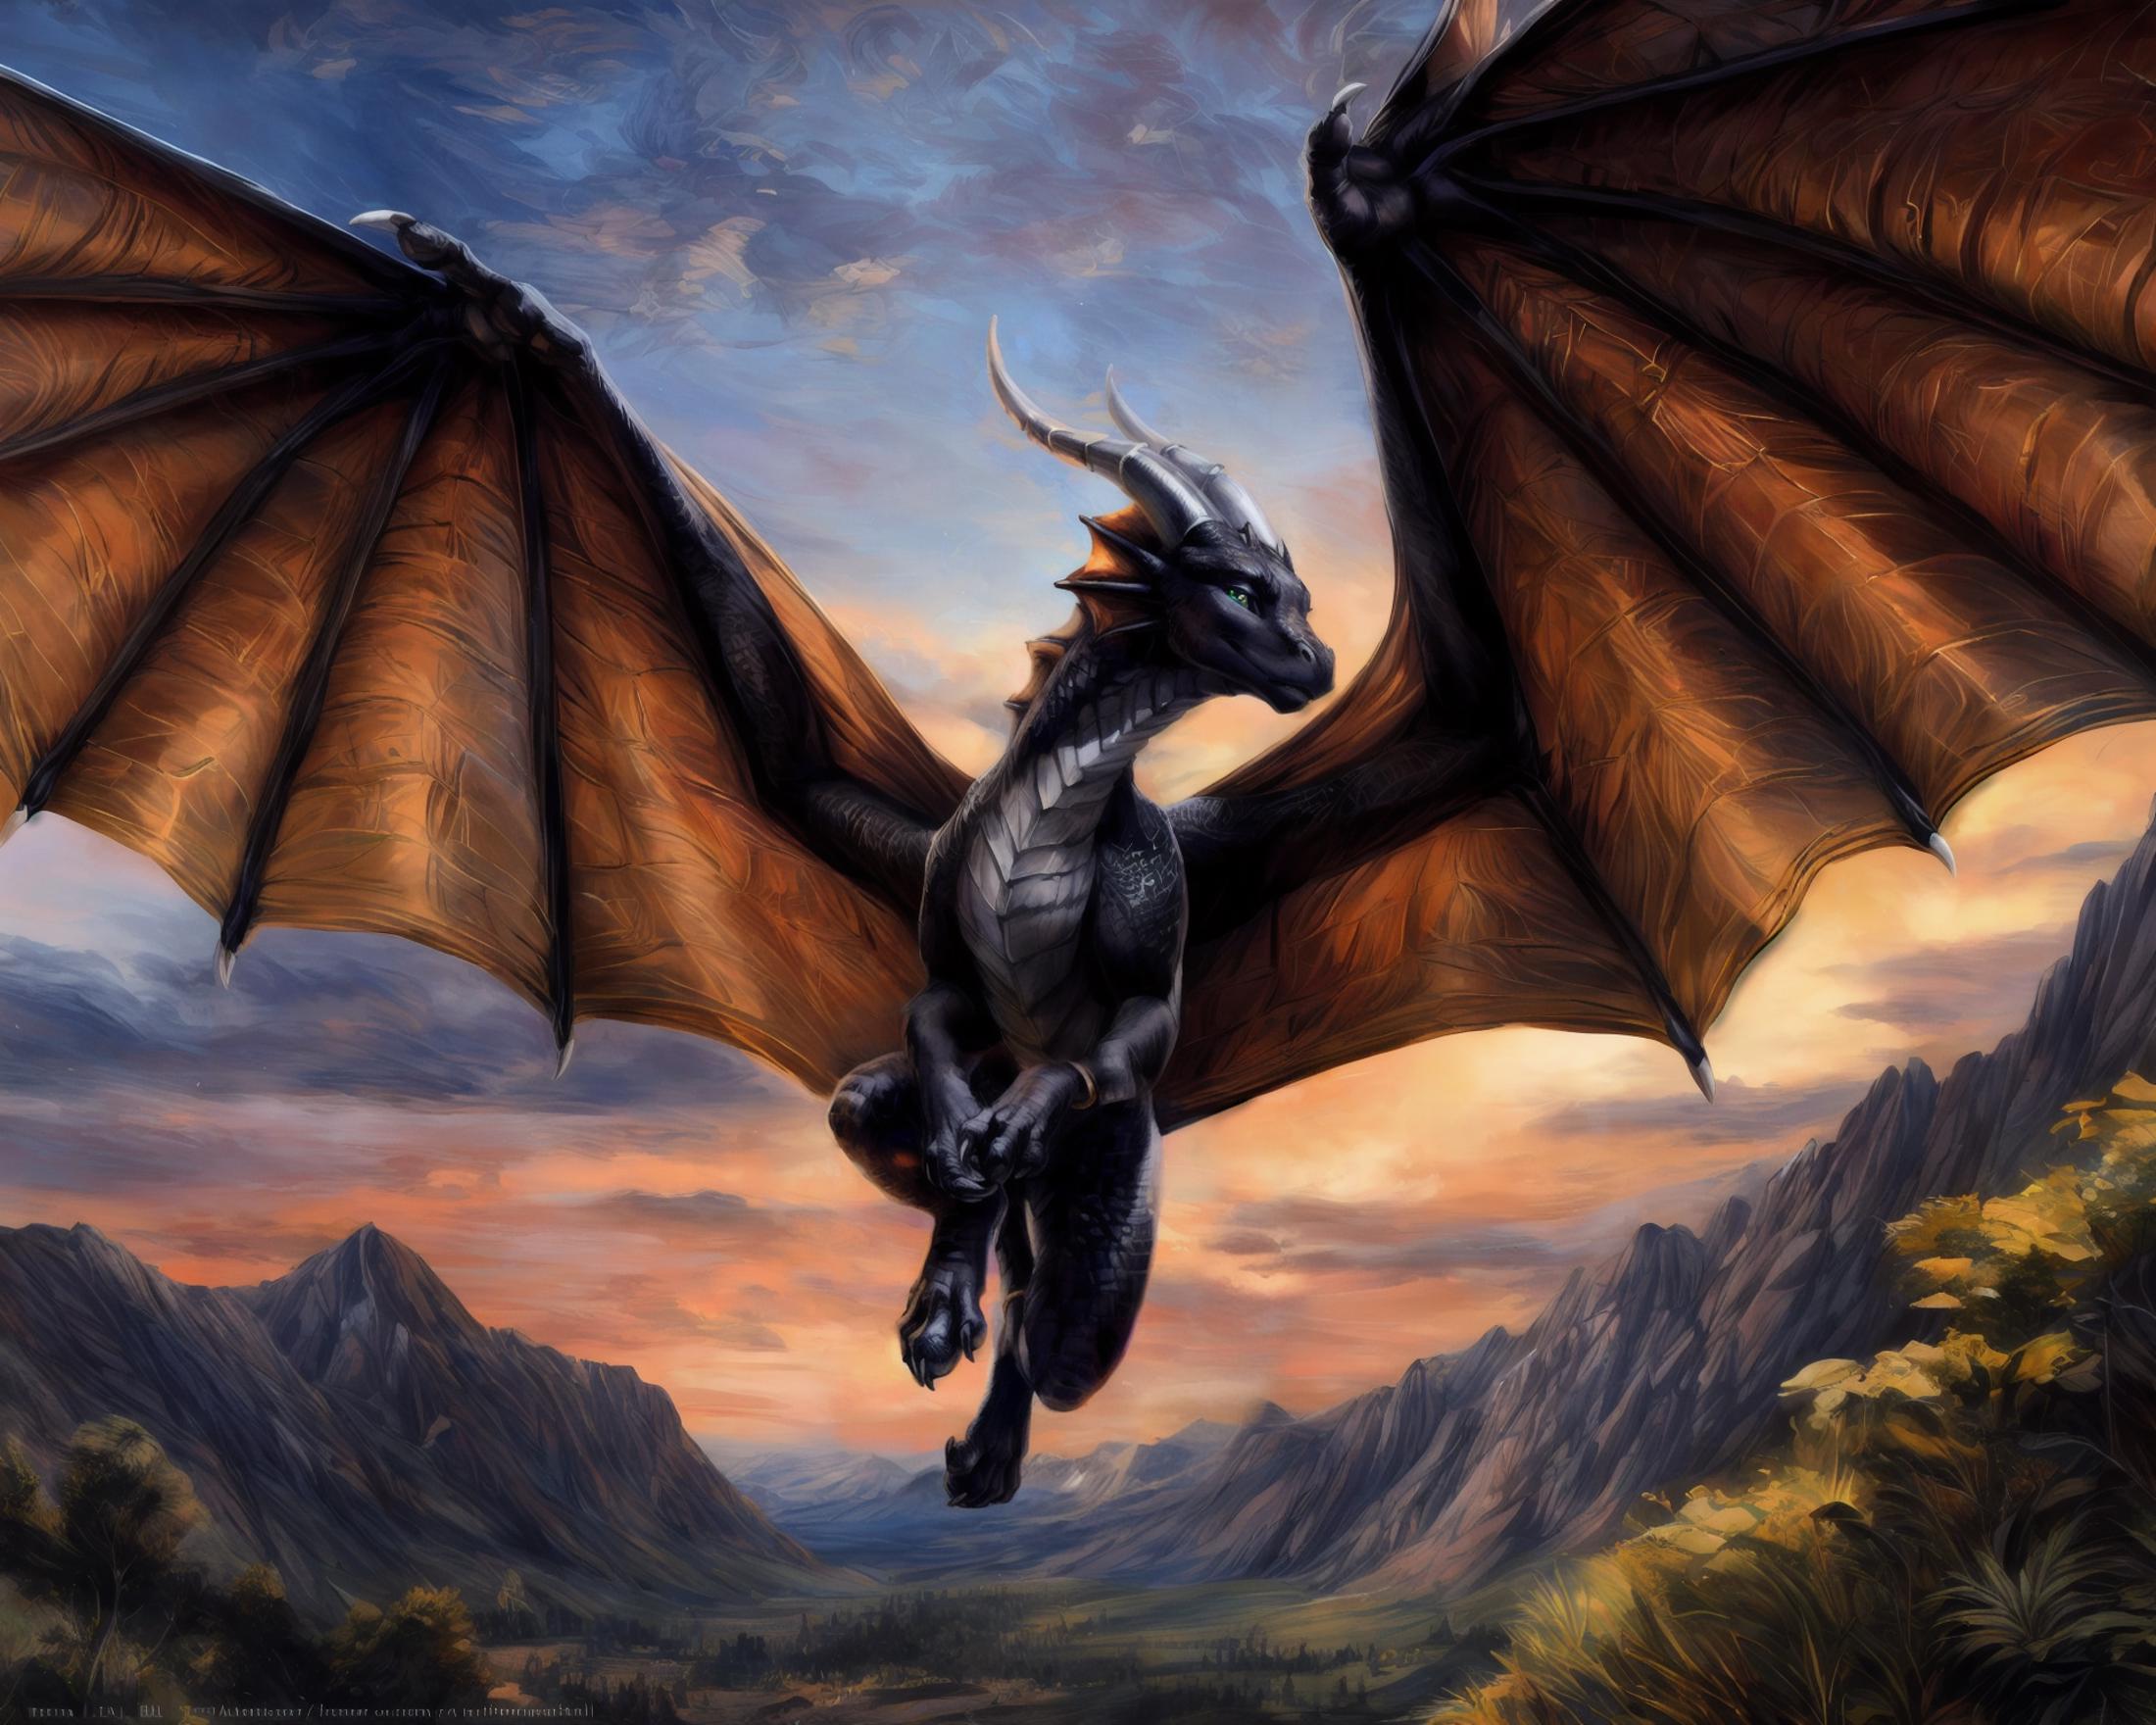 A majestic dragon with wings spread wide soaring through the sky.